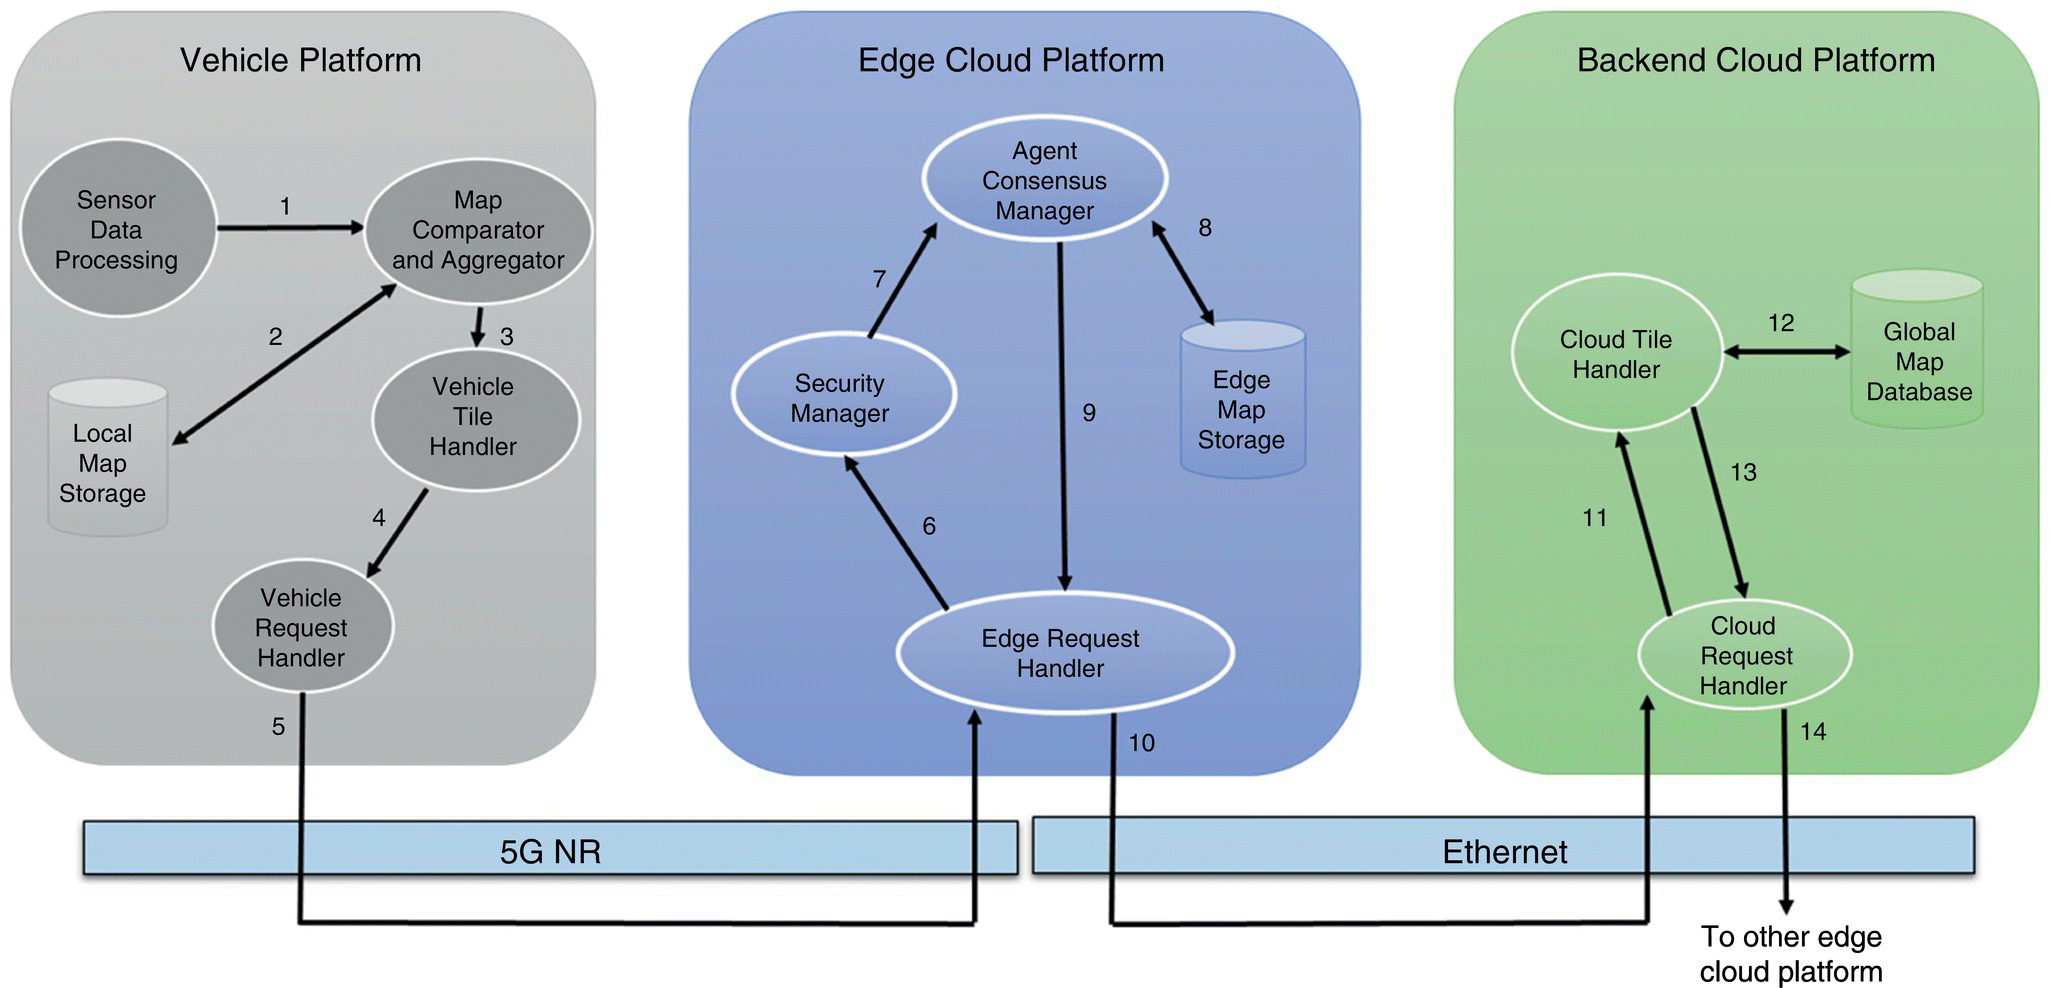 Schematic illustrating HD maps application data flow during map updates, with 3 panels for vehicle, edge cloud, and backend cloud platforms and two horizontal bars for 5G NR and Ethernet.